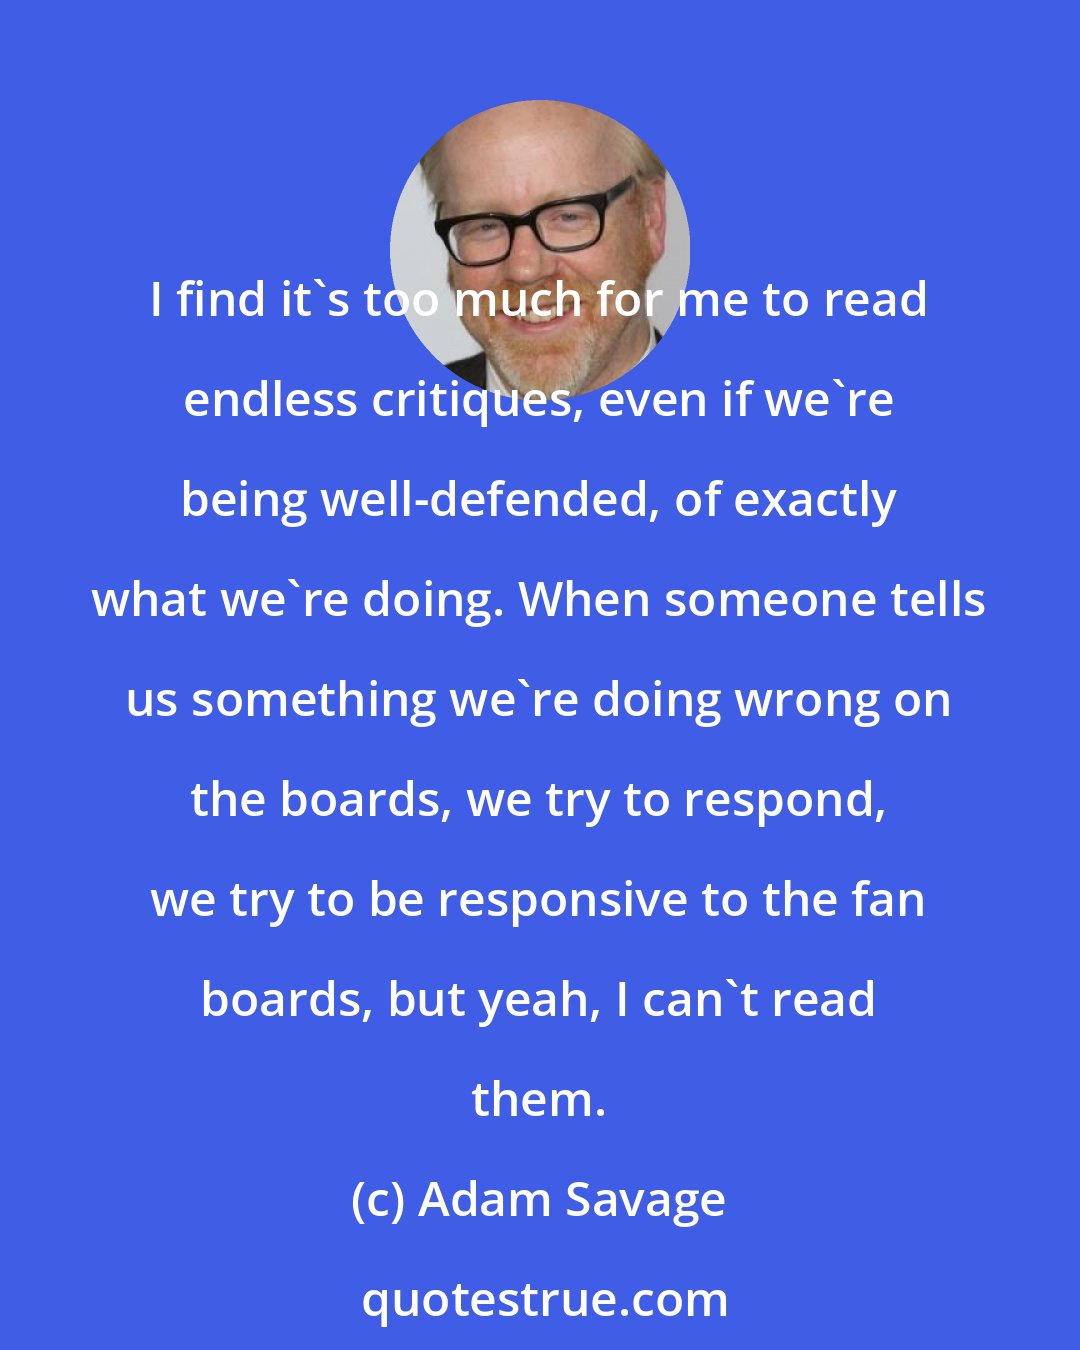 Adam Savage: I find it's too much for me to read endless critiques, even if we're being well-defended, of exactly what we're doing. When someone tells us something we're doing wrong on the boards, we try to respond, we try to be responsive to the fan boards, but yeah, I can't read them.